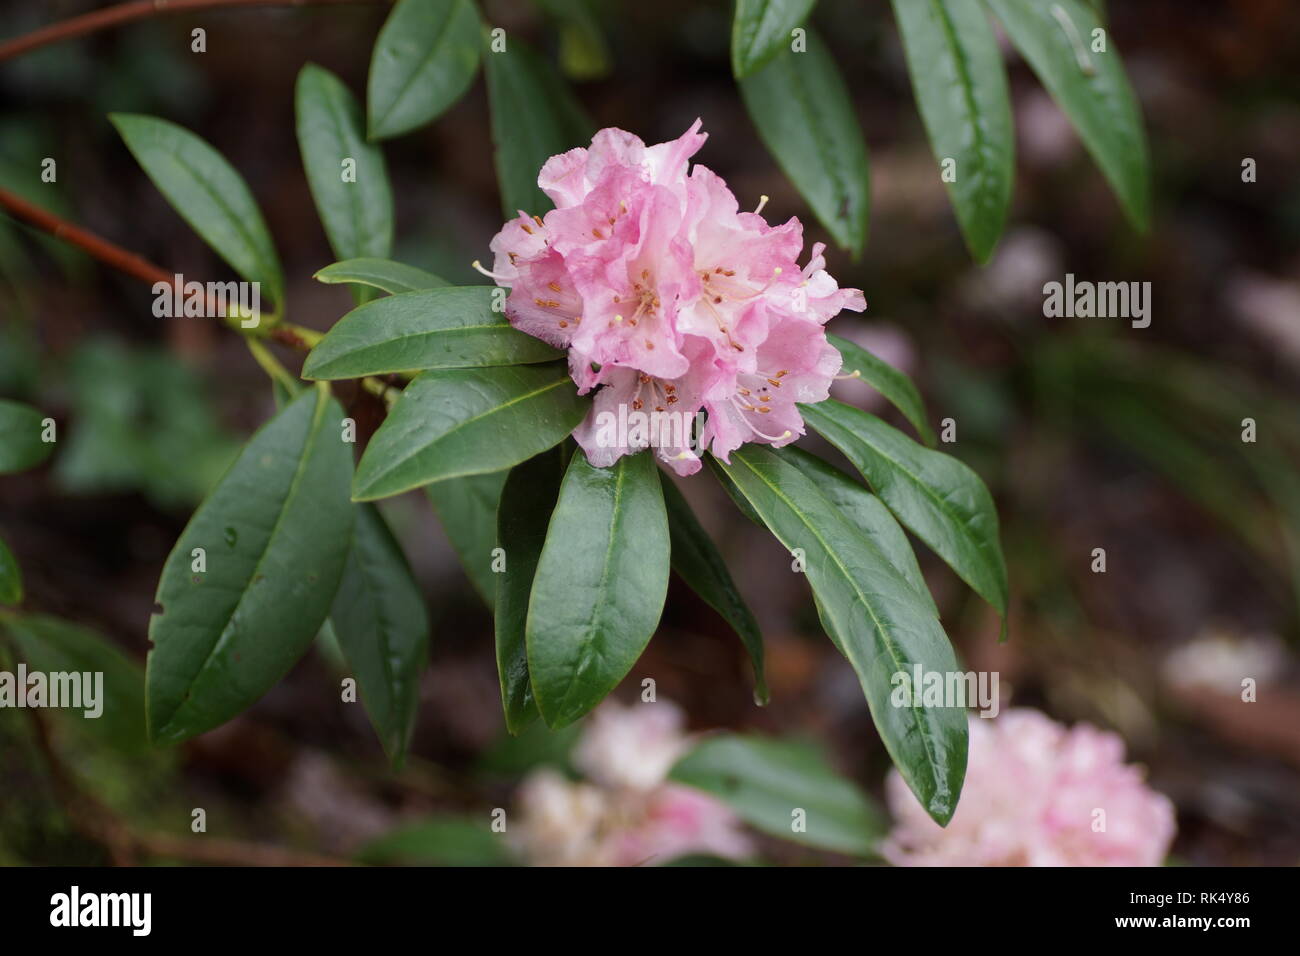 Rhododendron 'Christmas Cheer' at Clyne gardens, Swansea, Wales, UK. Stock Photo